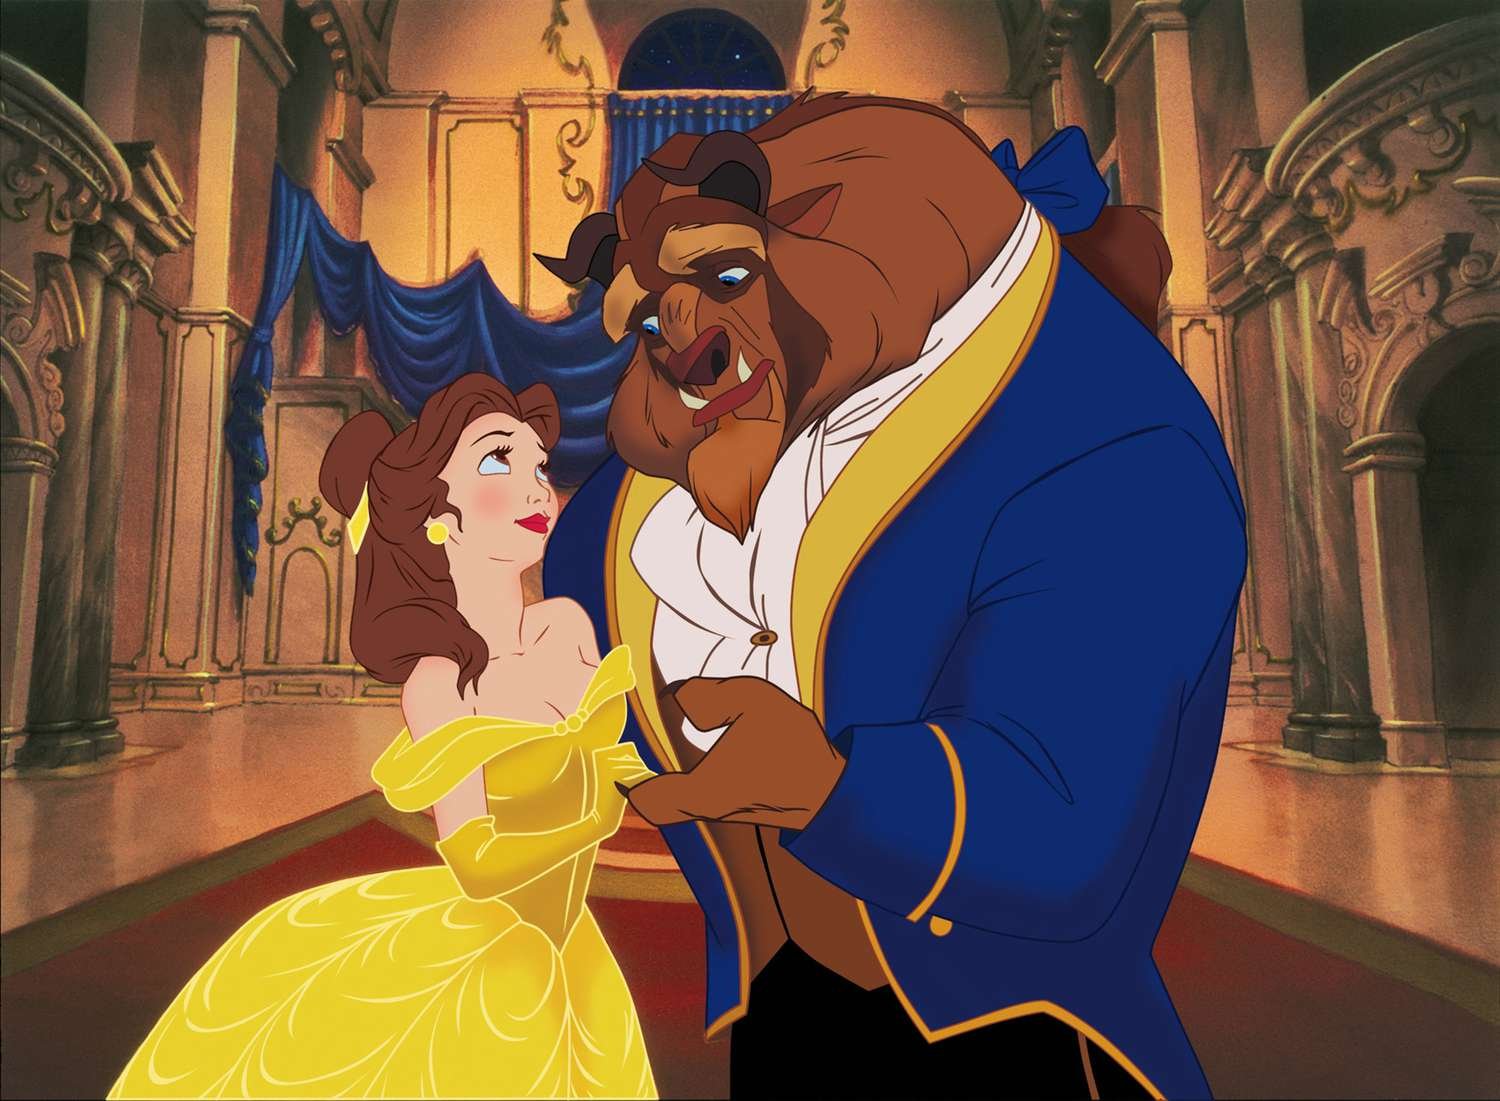 Beauty and the Beast – A Timeless Tale of Love